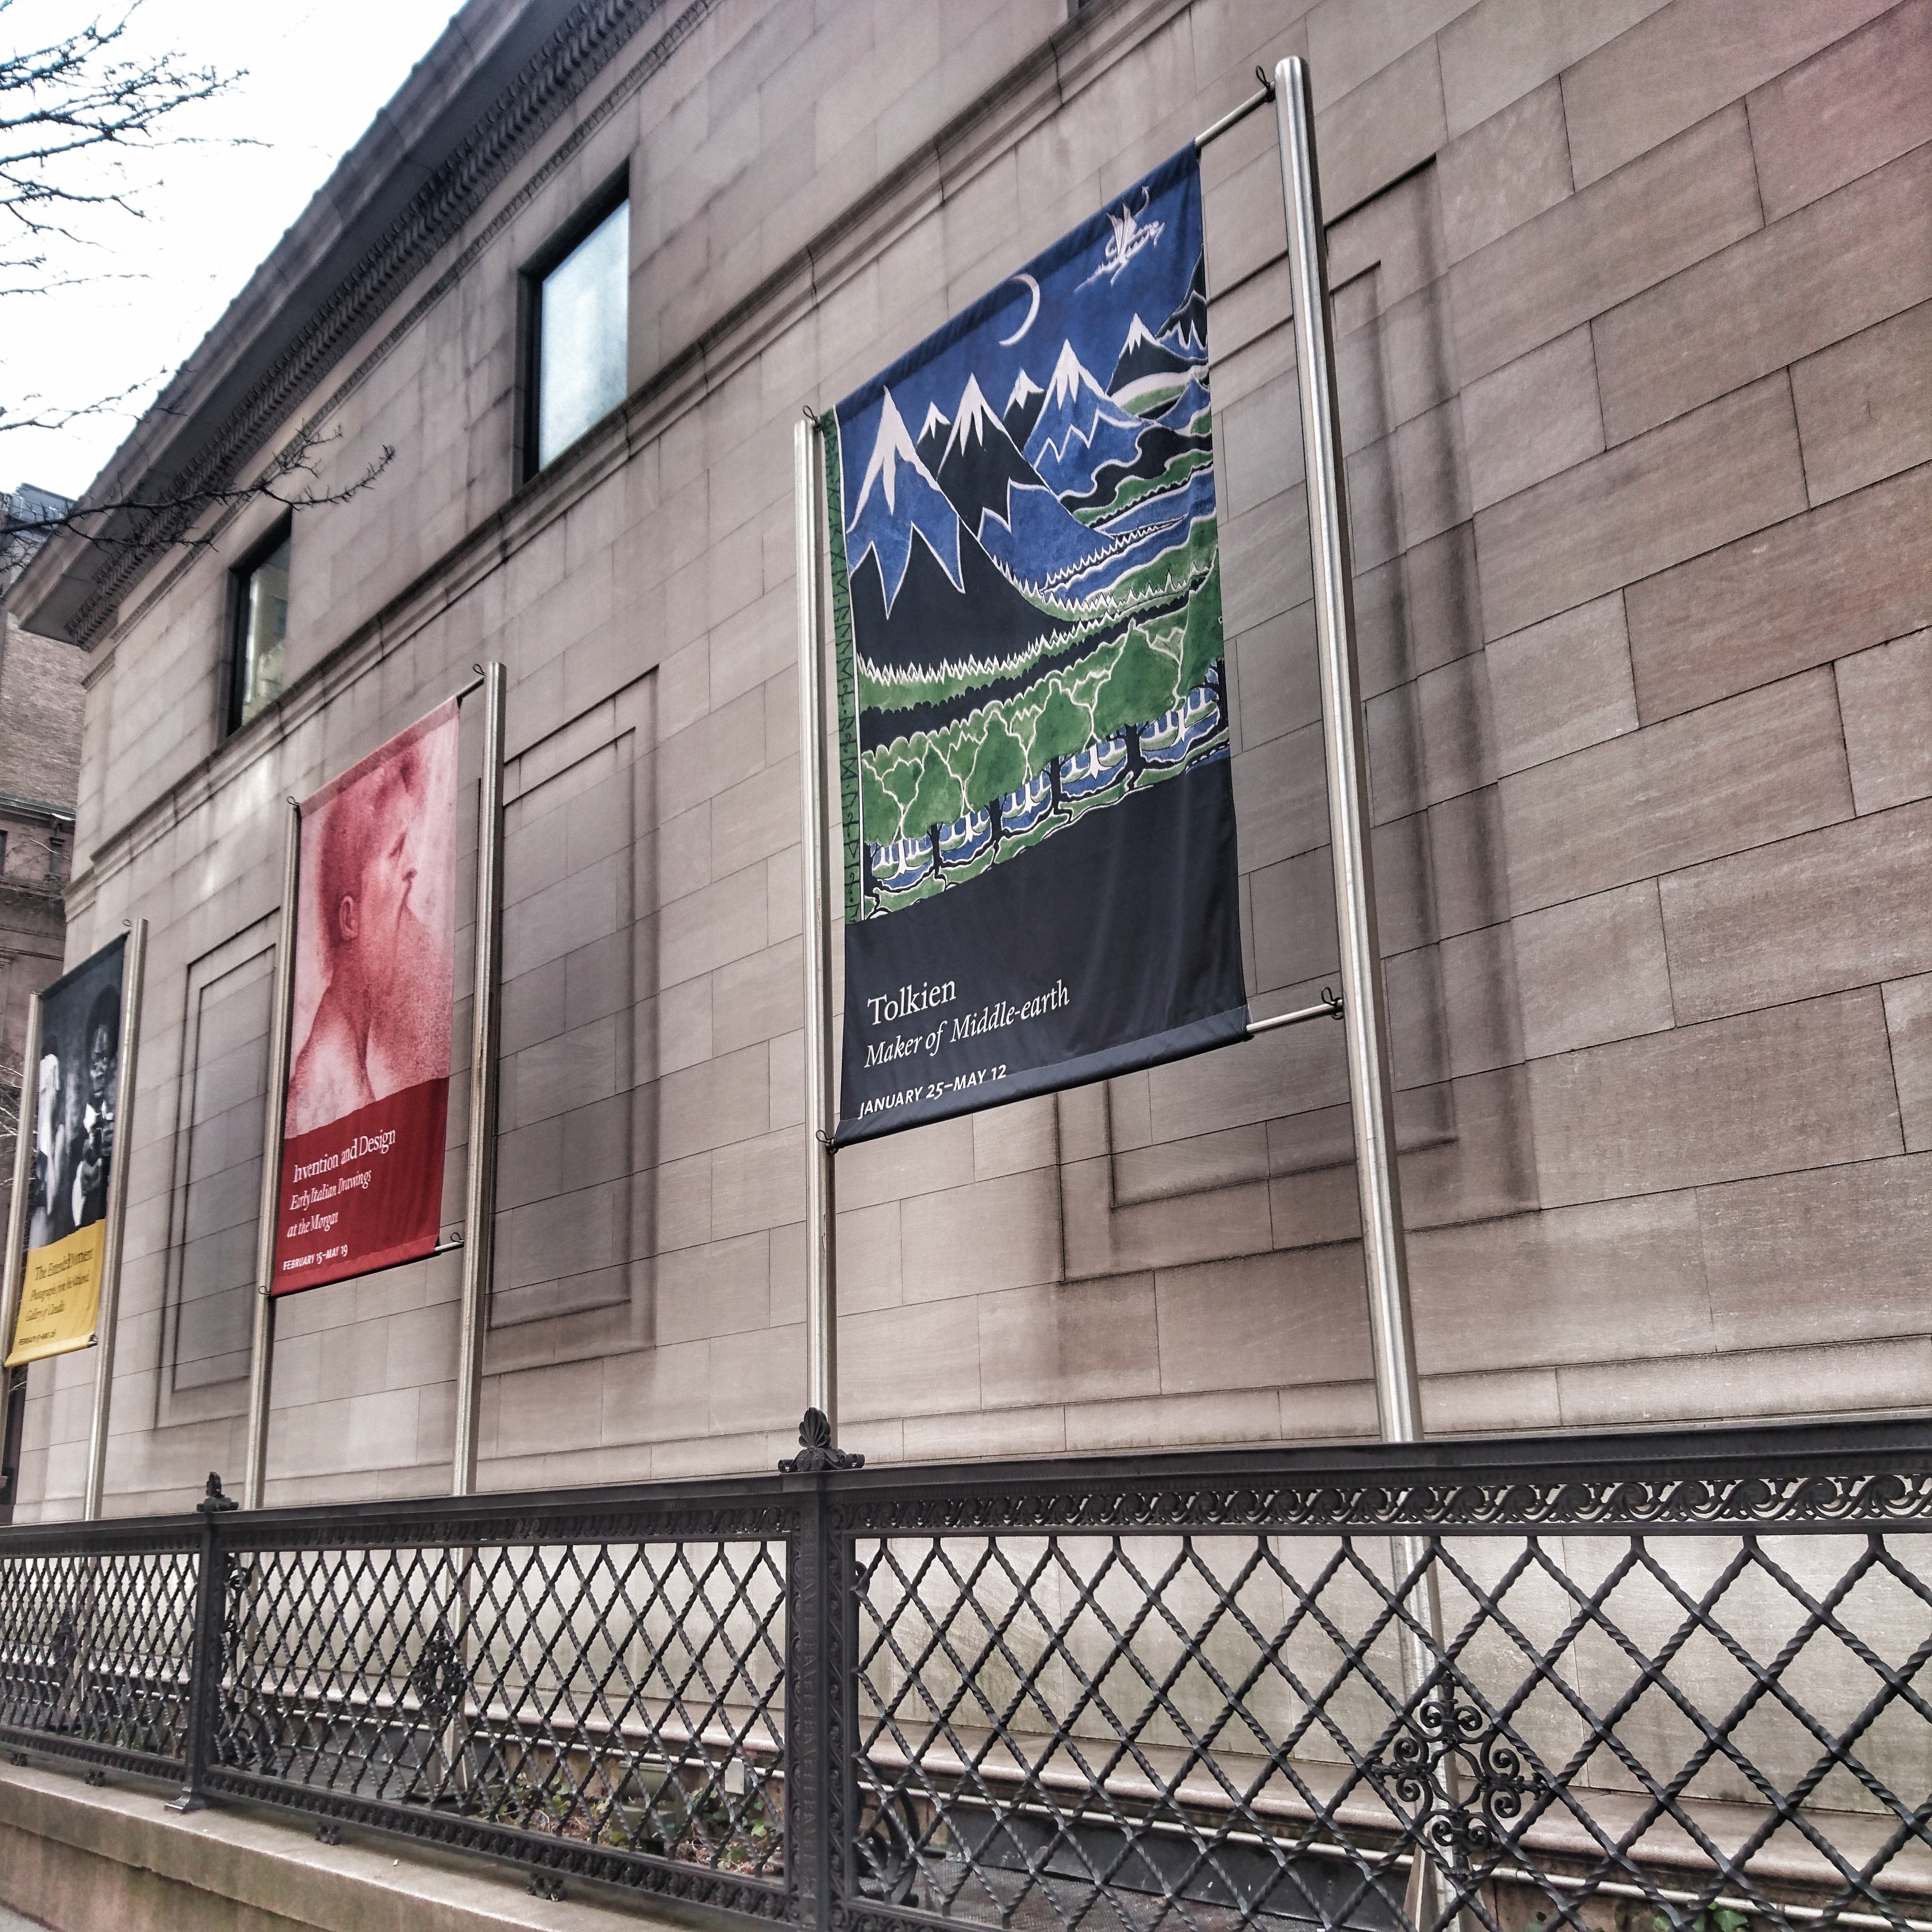 Banner of Tolkien exhibition in front of Morgan Library & Museum (c) Marcel R. Bülles